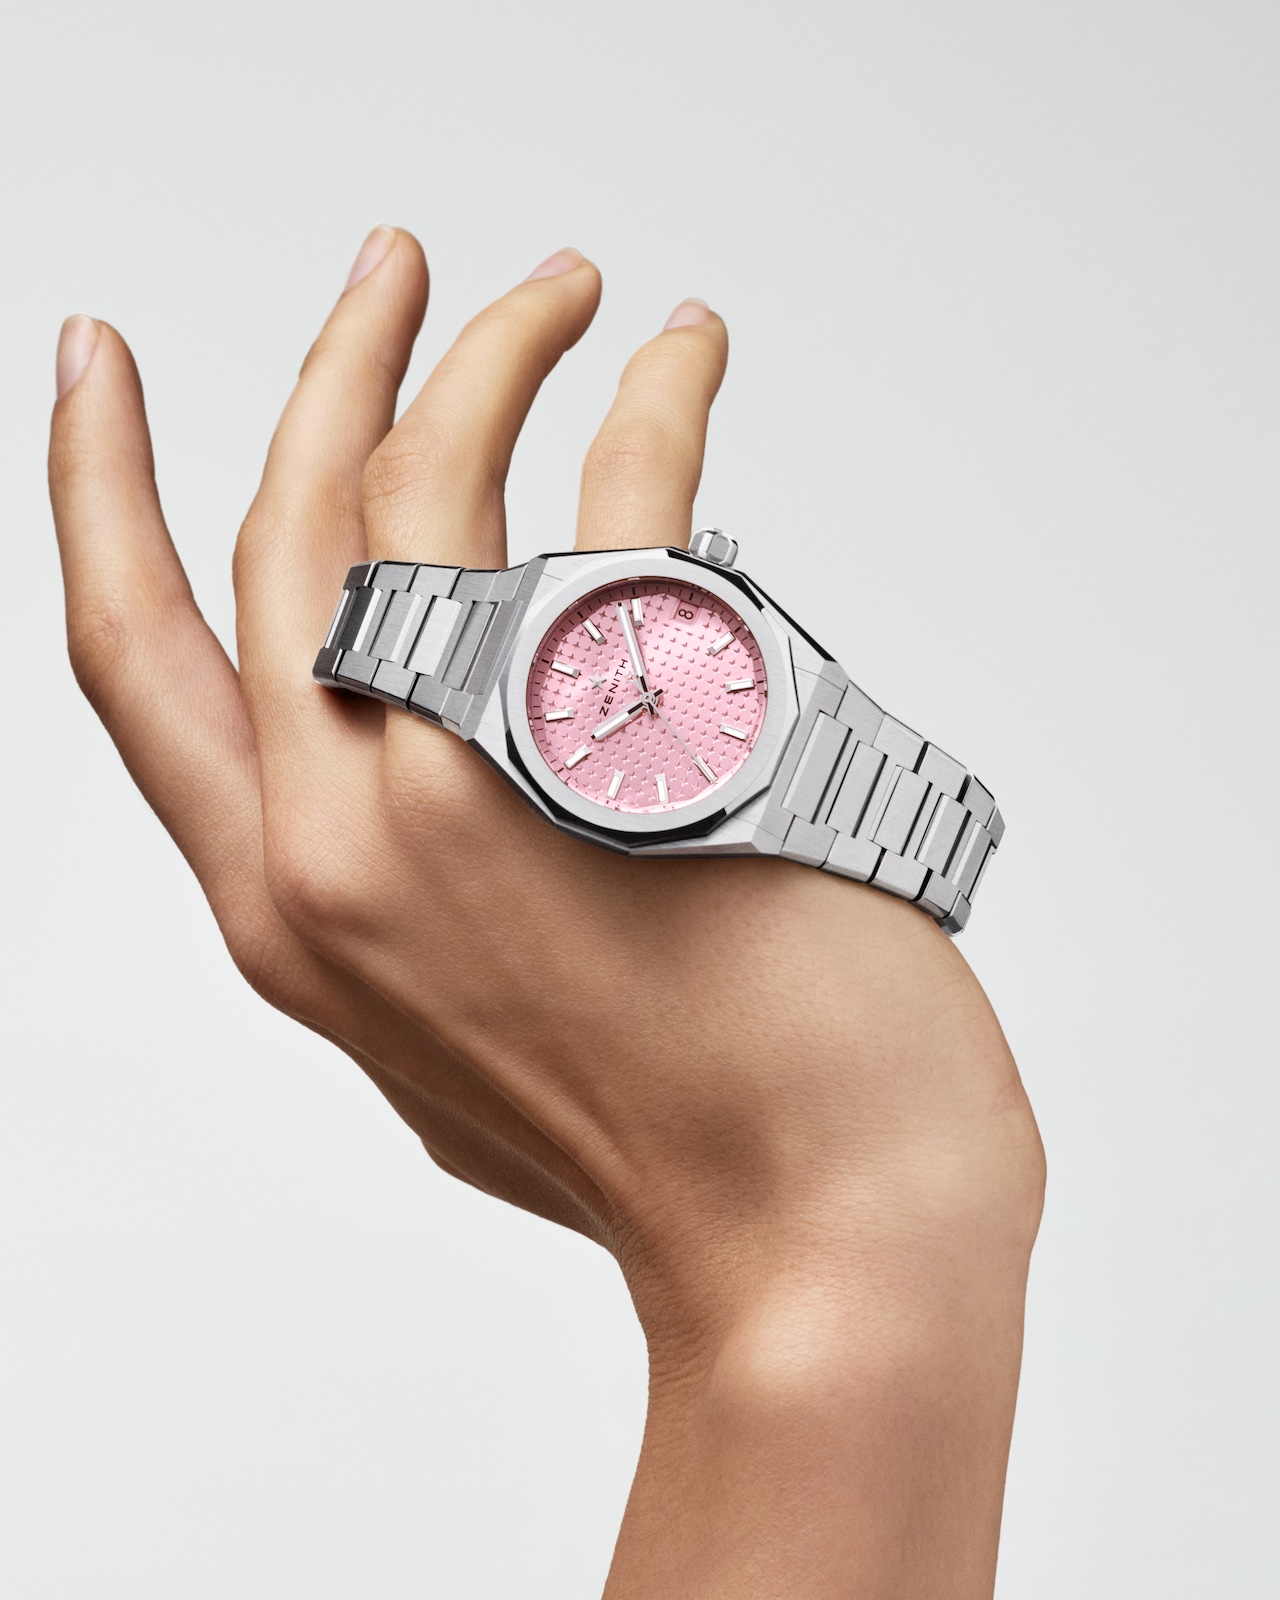 Hand holding watch with pink face